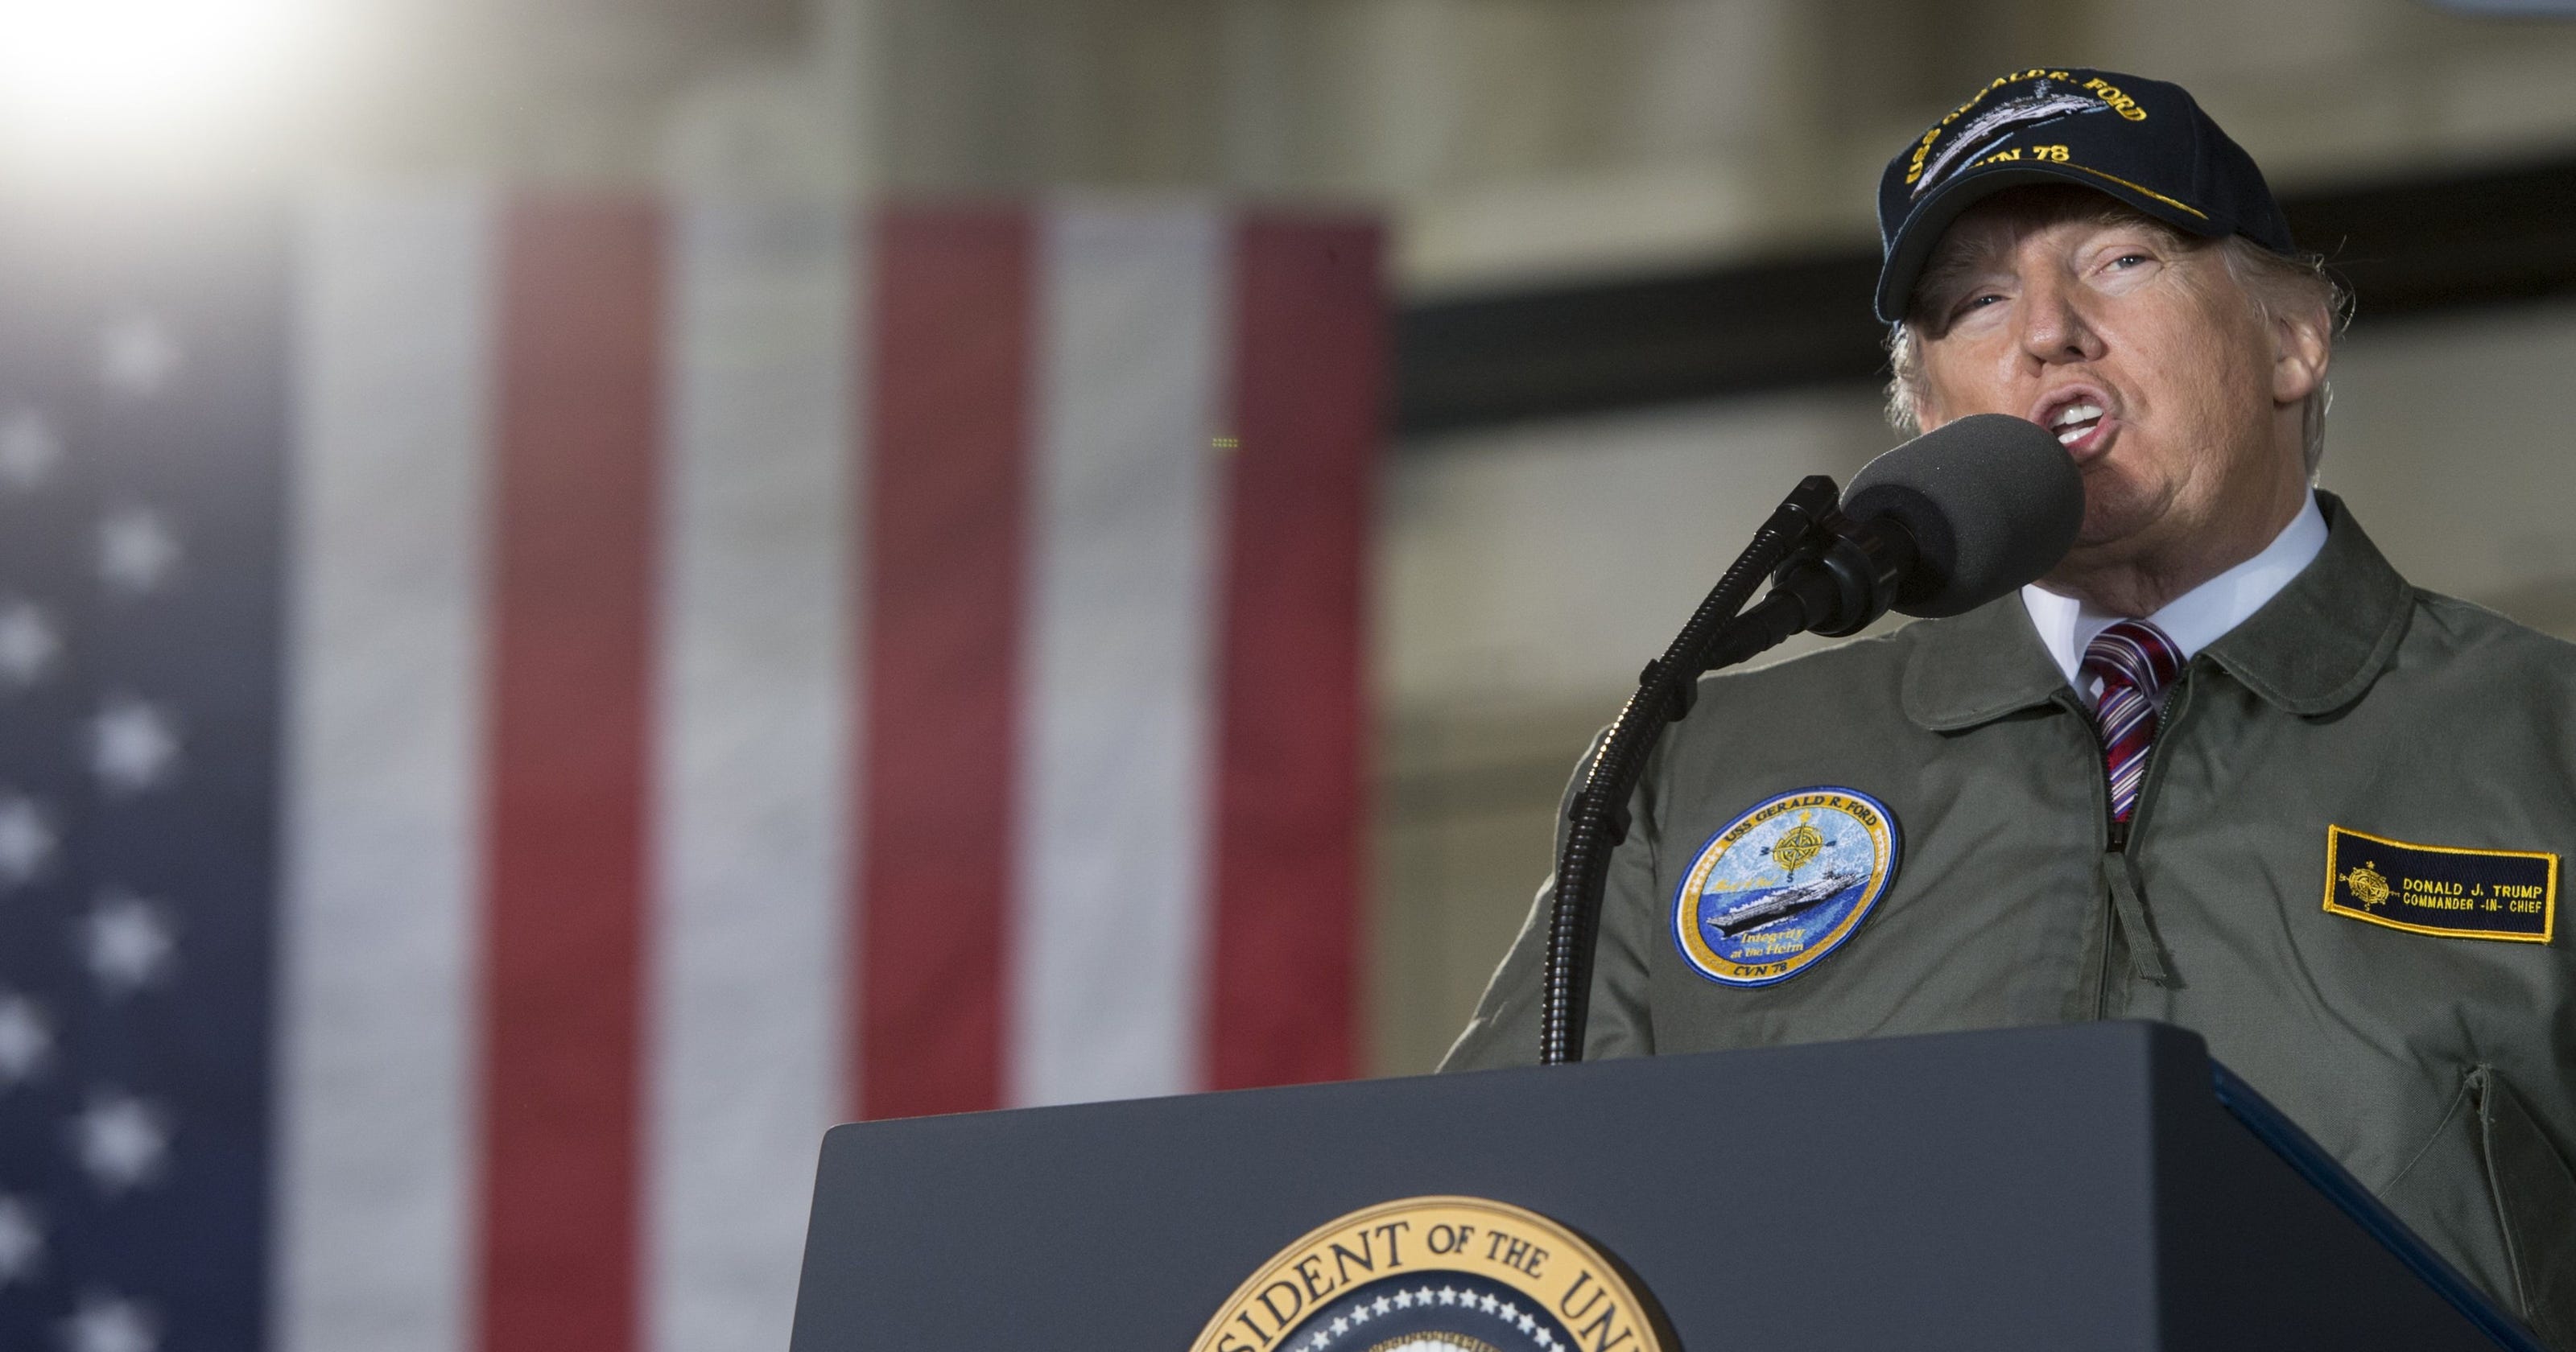 Some Vets Call Foul On Trump For Wearing Flight Jacket Admirals Cap